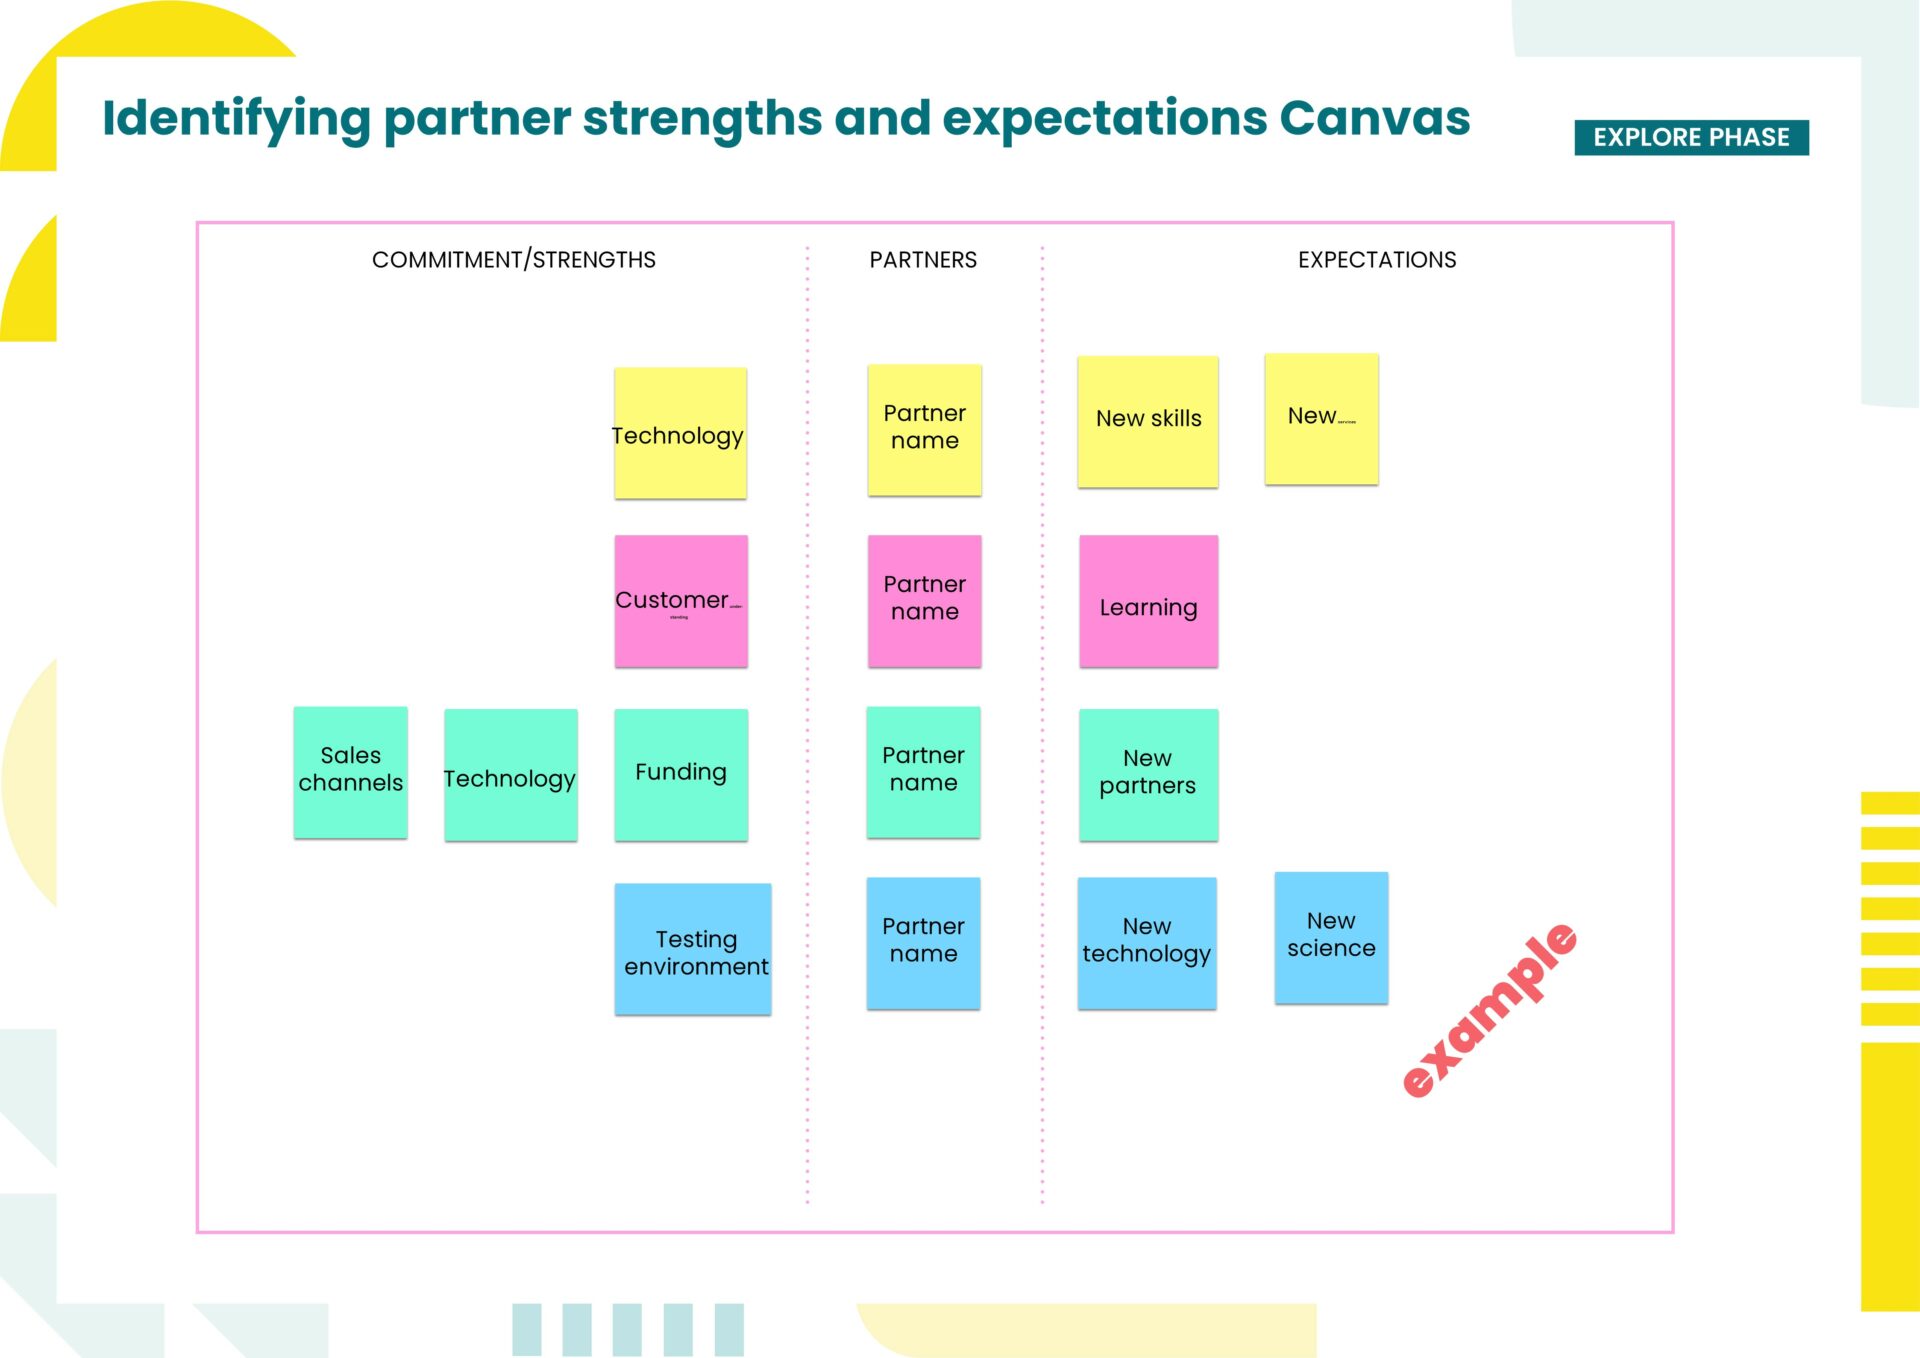 Identifying partner strengths and expecations canvas.